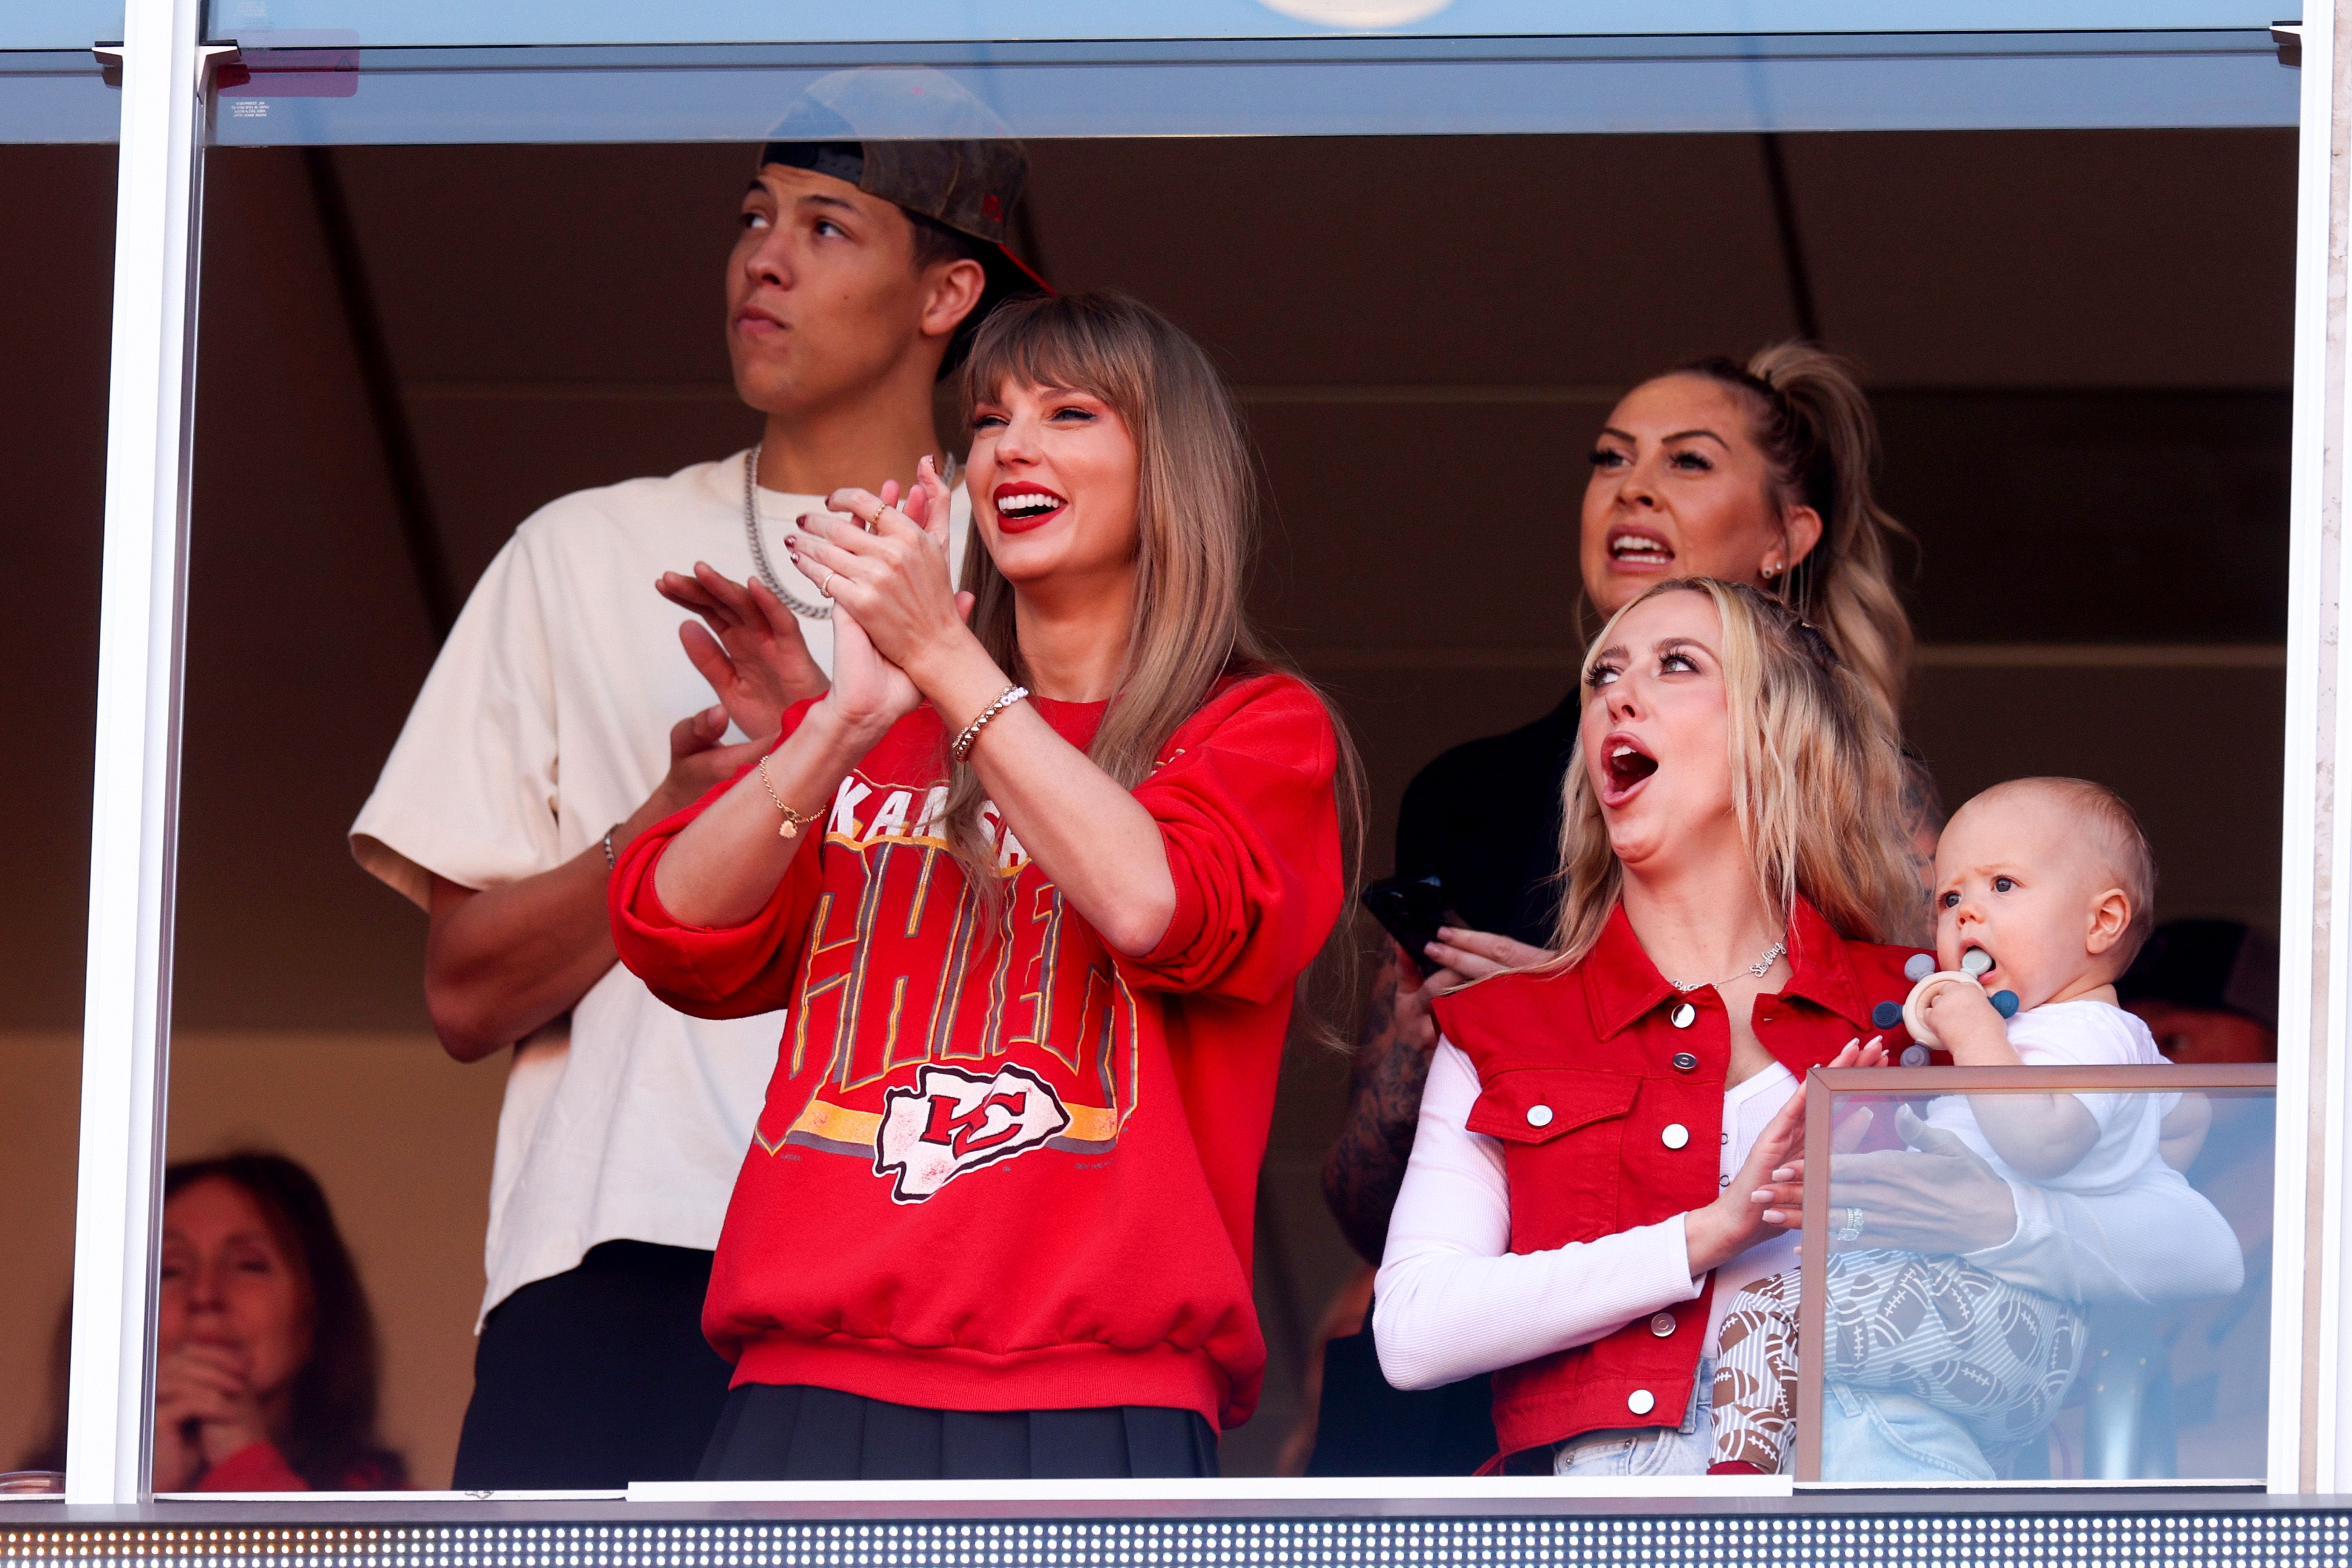 Taylor Swift shows off competitive streak while playing Game Of  Thrones-themed game with family